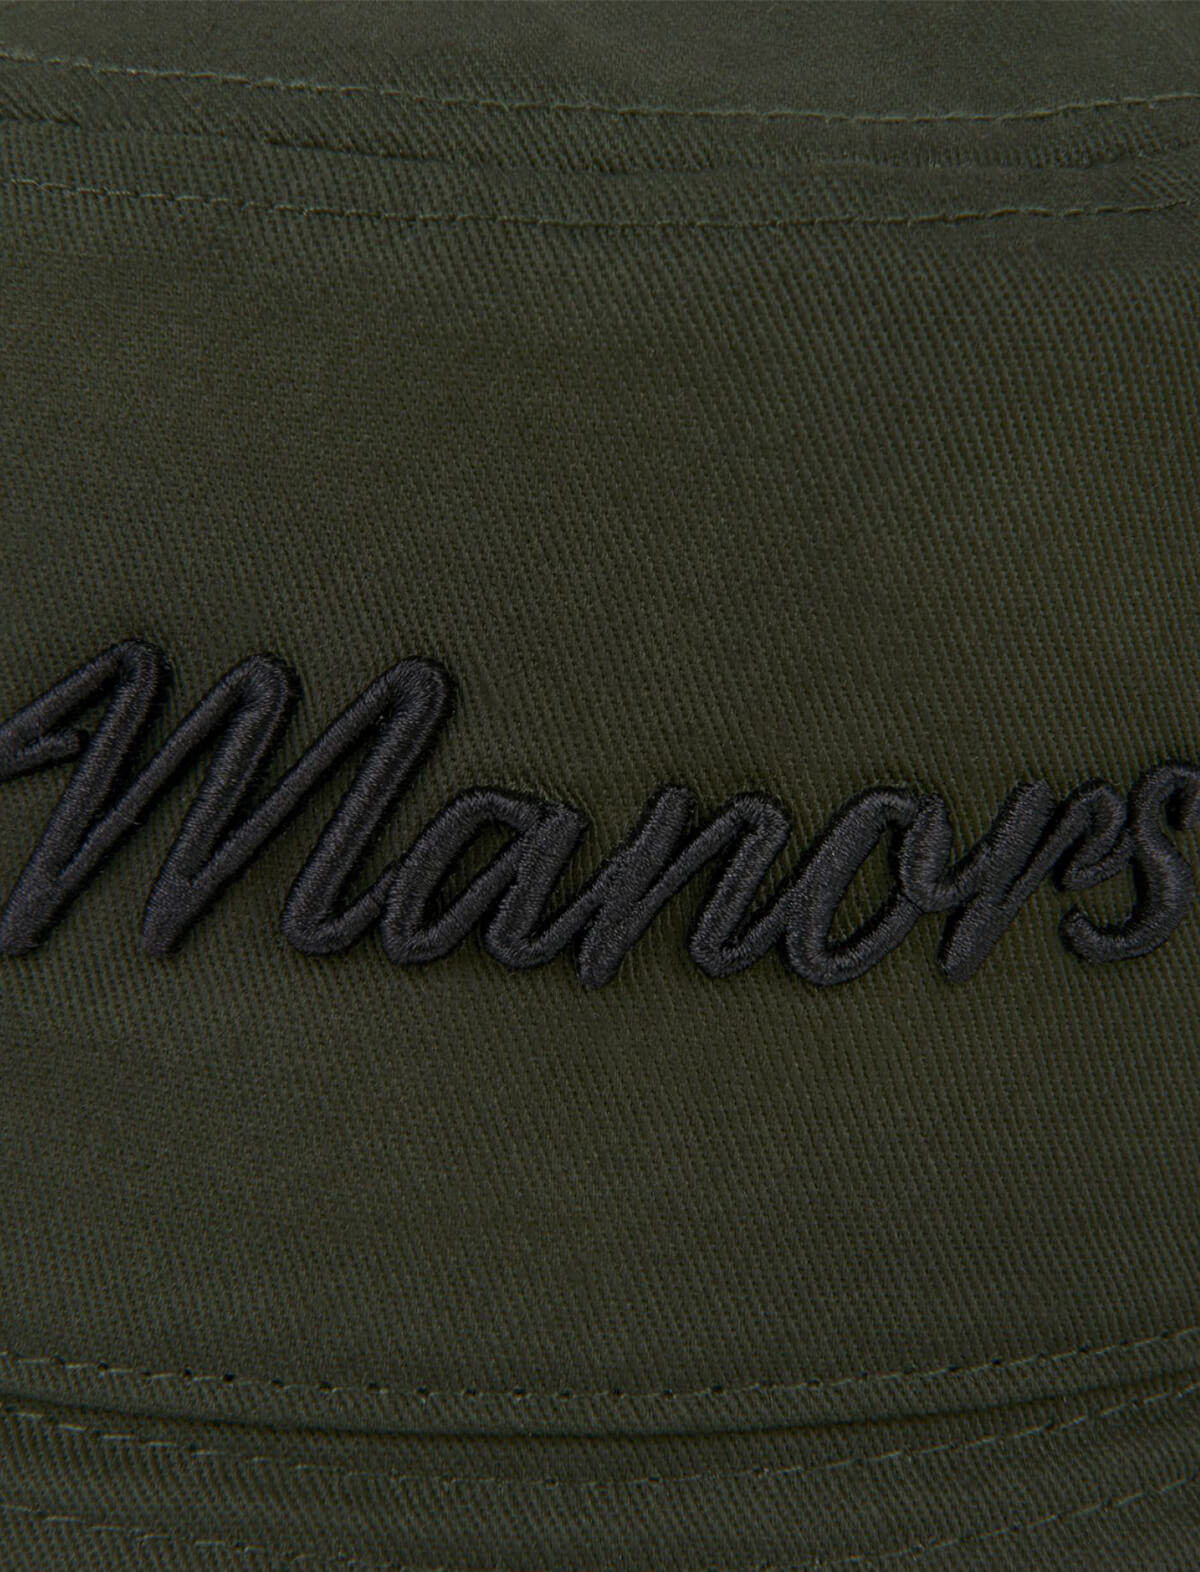 MANORS GOLF Classic Bucket Hat in Green